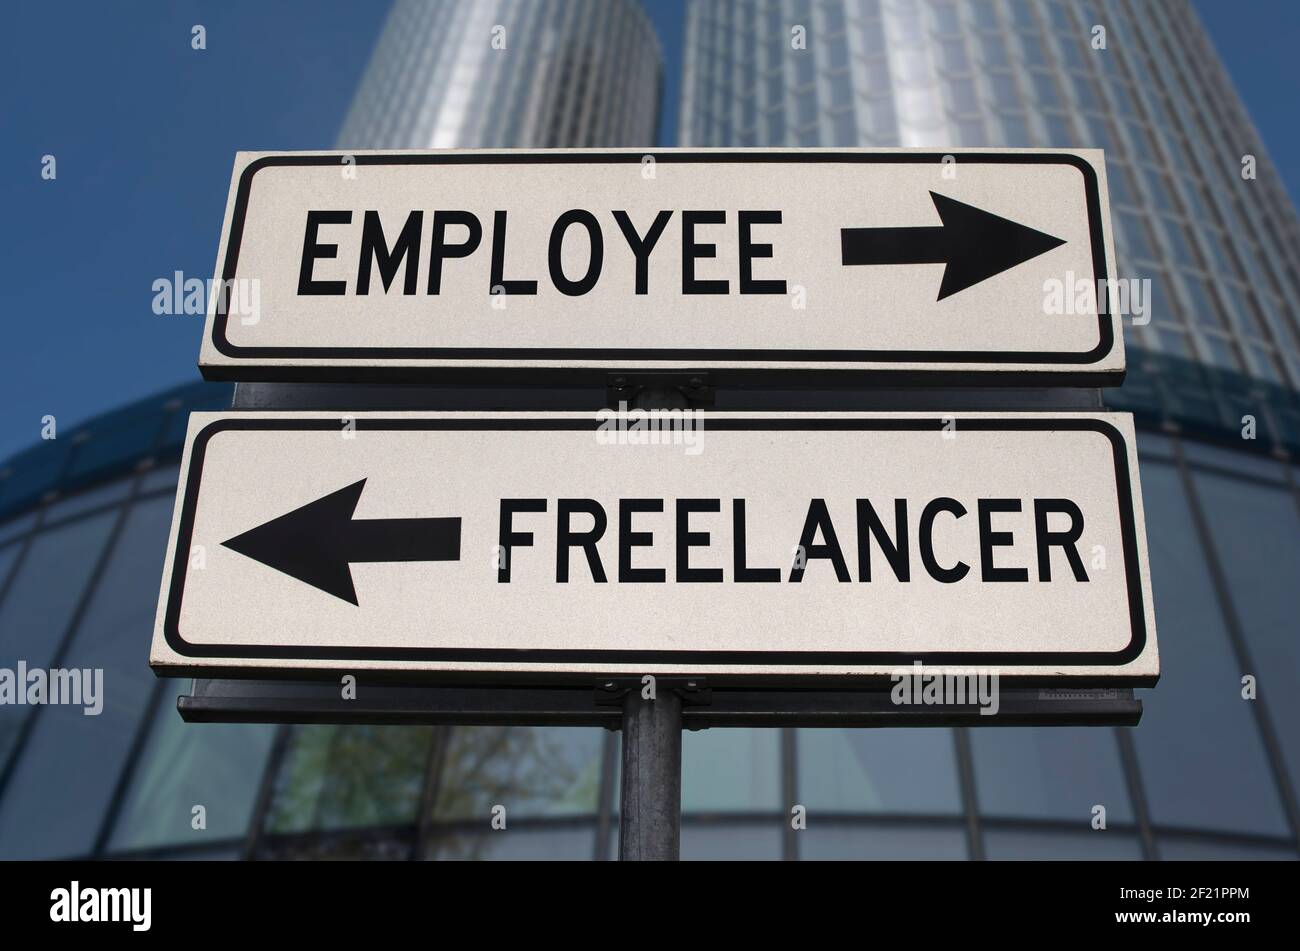 Employee versus freelancer road sign with two arrows on business skyscraper background. White two street sign with arrows on metal pole. Stock Photo